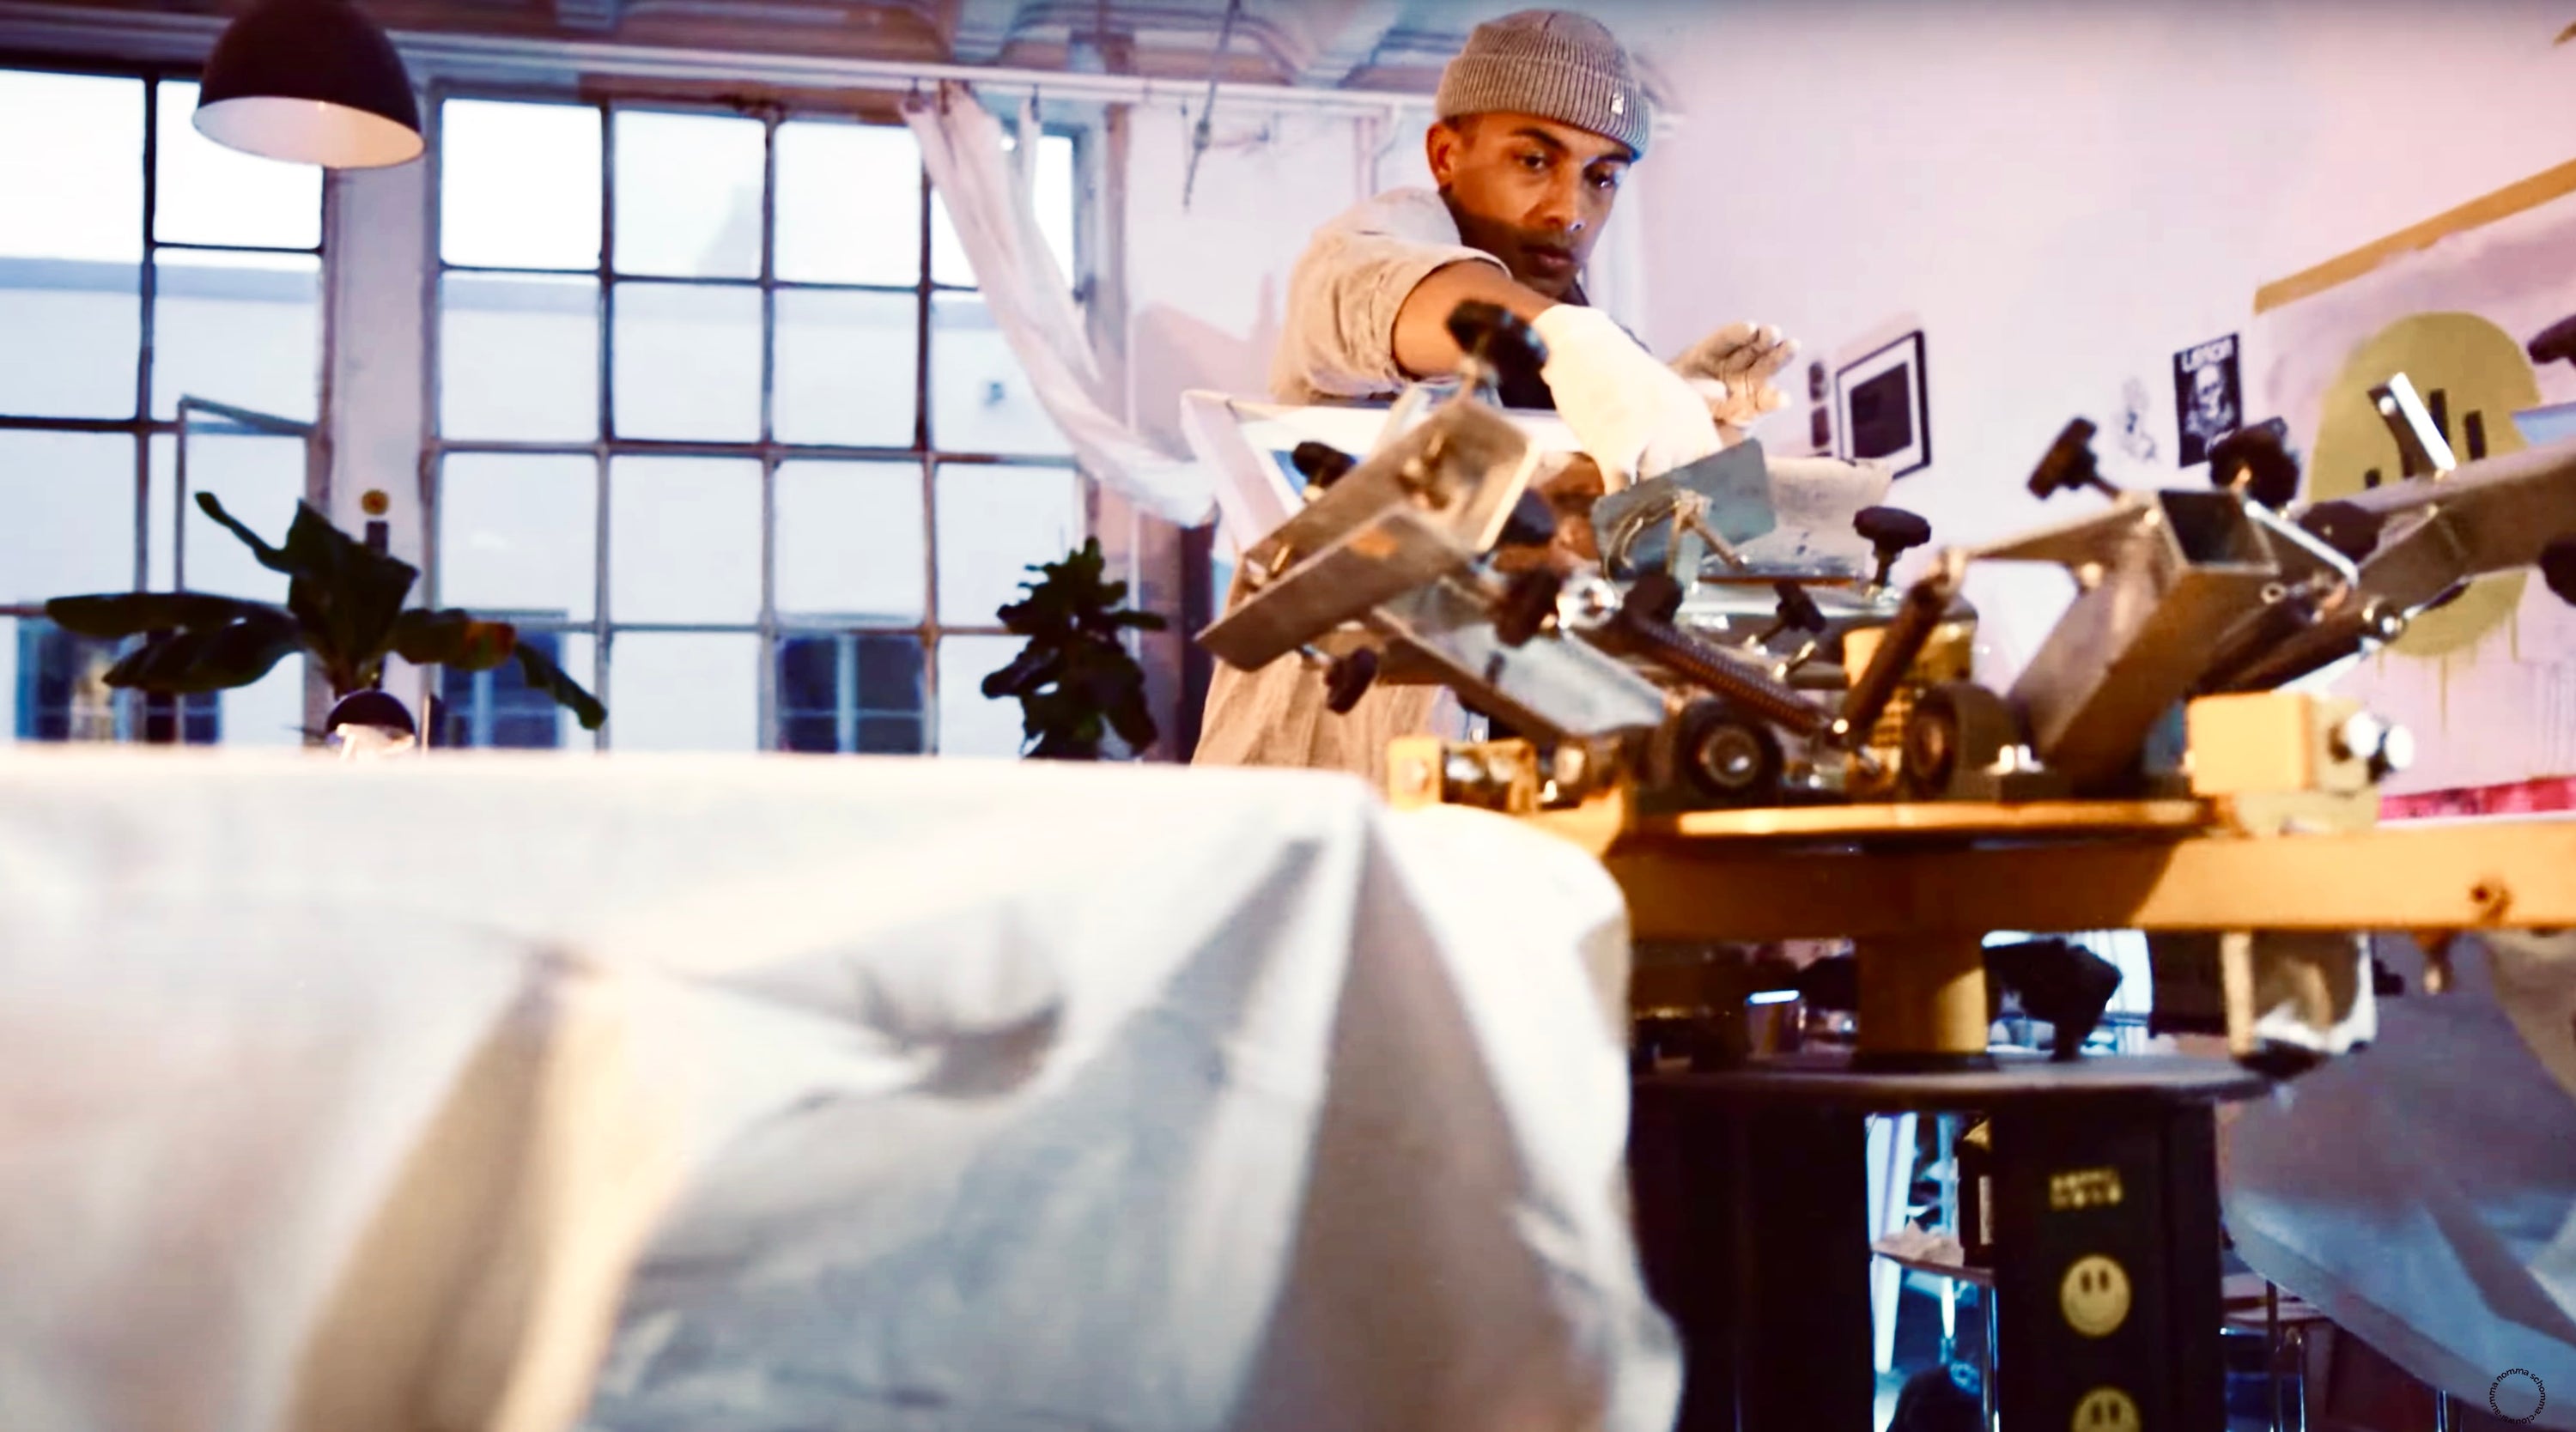 Clouwsi Co-Founder is printing t-shirts on a screen printing carousel